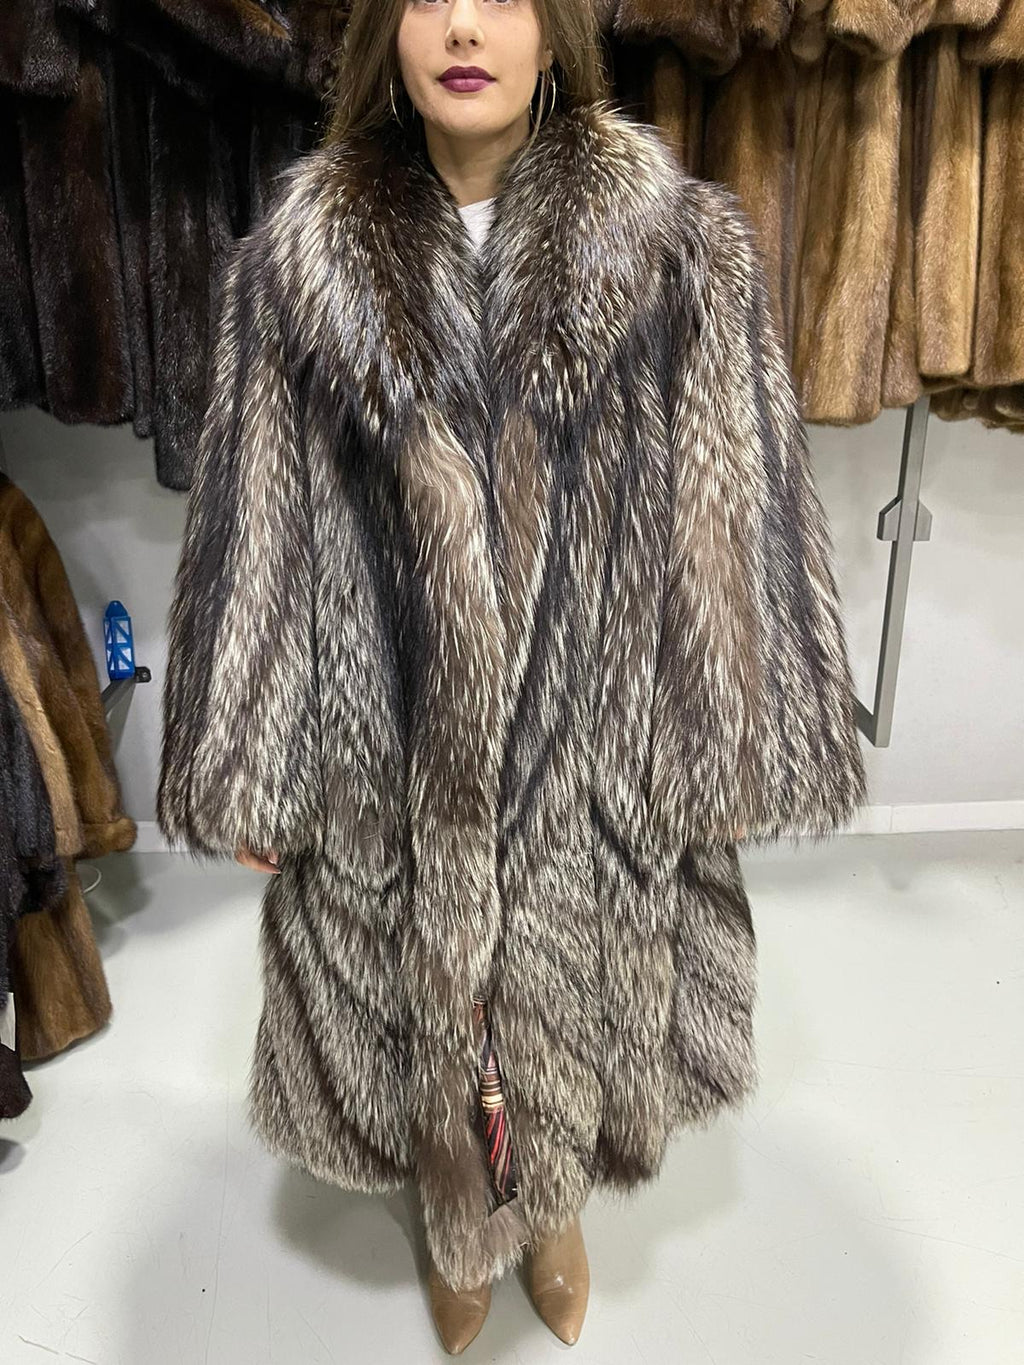 Vintage SAGA Italian Designer Fine Silver Fox Fur Swing Coat - This coat is available. Contact us to enquire.